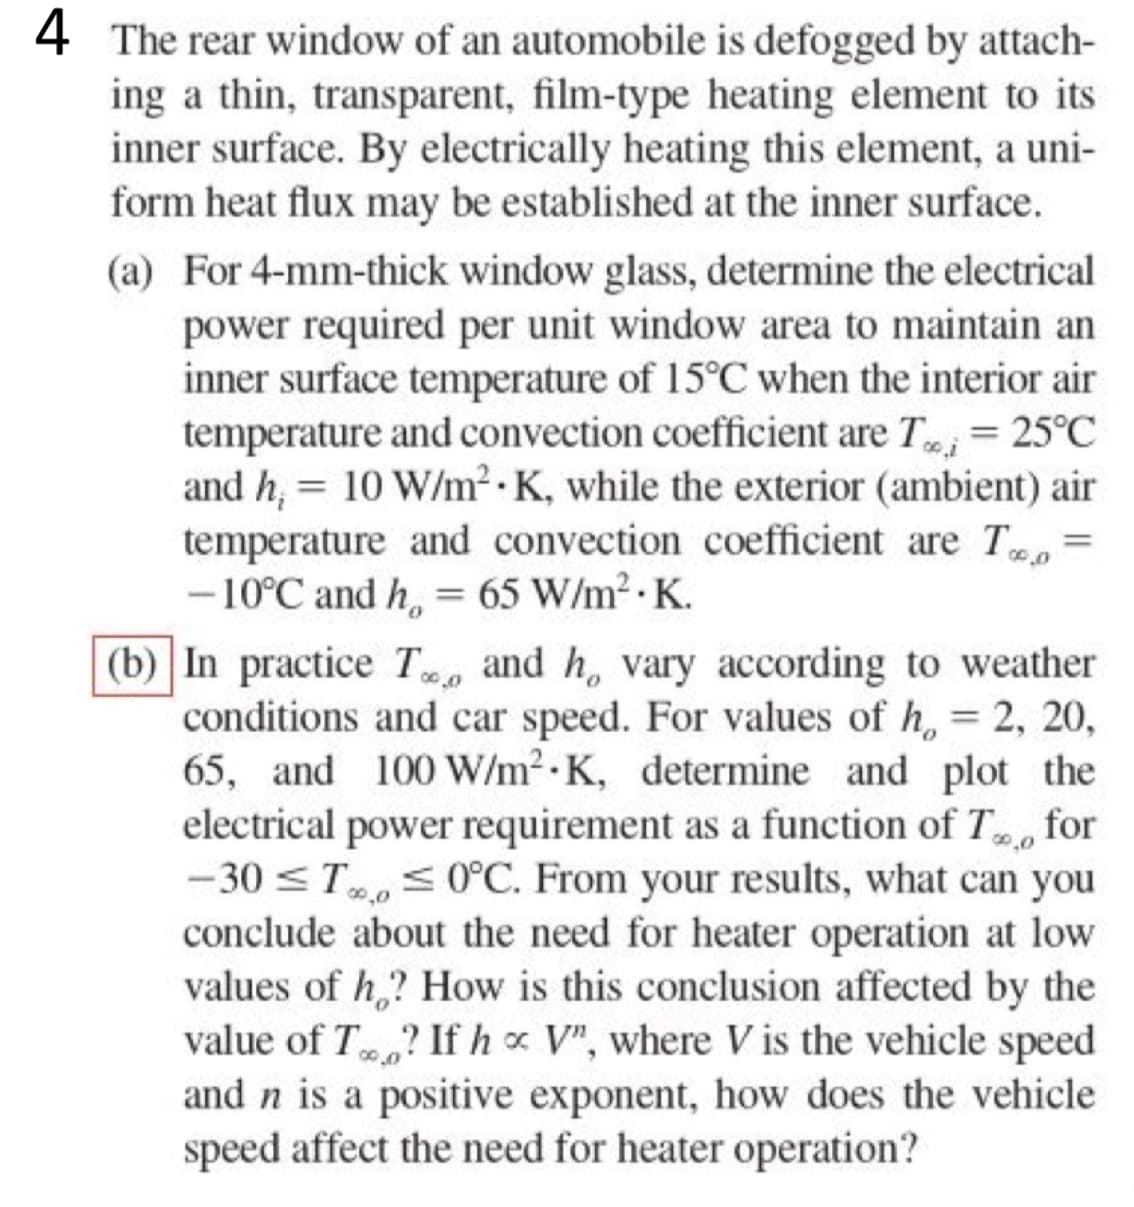 4 The rear window of an automobile is defogged by attach-
ing a thin, transparent, film-type heating element to its
inner surface. By electrically heating this element, a uni-
form heat flux may be established at the inner surface.
(a) For 4-mm-thick window glass, determine the electrical
power required per unit window area to maintain an
inner surface temperature of 15°C when the interior air
temperature and convection coefficient are Tooi = 25°C
and h₁ = 10 W/m².K, while the exterior (ambient) air
temperature and convection coefficient are To
-10°C and h = 65 W/m².K.
=
00.00
(b) In practice T and h, vary according to weather
conditions and car speed. For values of h, = 2, 20,
65, and 100 W/m² K, determine and plot the
electrical power requirement as a function of To for
-30 ≤ T ≤ 0°C. From your results, what can you
conclude about the need for heater operation at low
values of h? How is this conclusion affected by the
value of T? If hx V", where V is the vehicle speed
and n is a positive exponent, how does the vehicle
speed affect the need for heater operation?